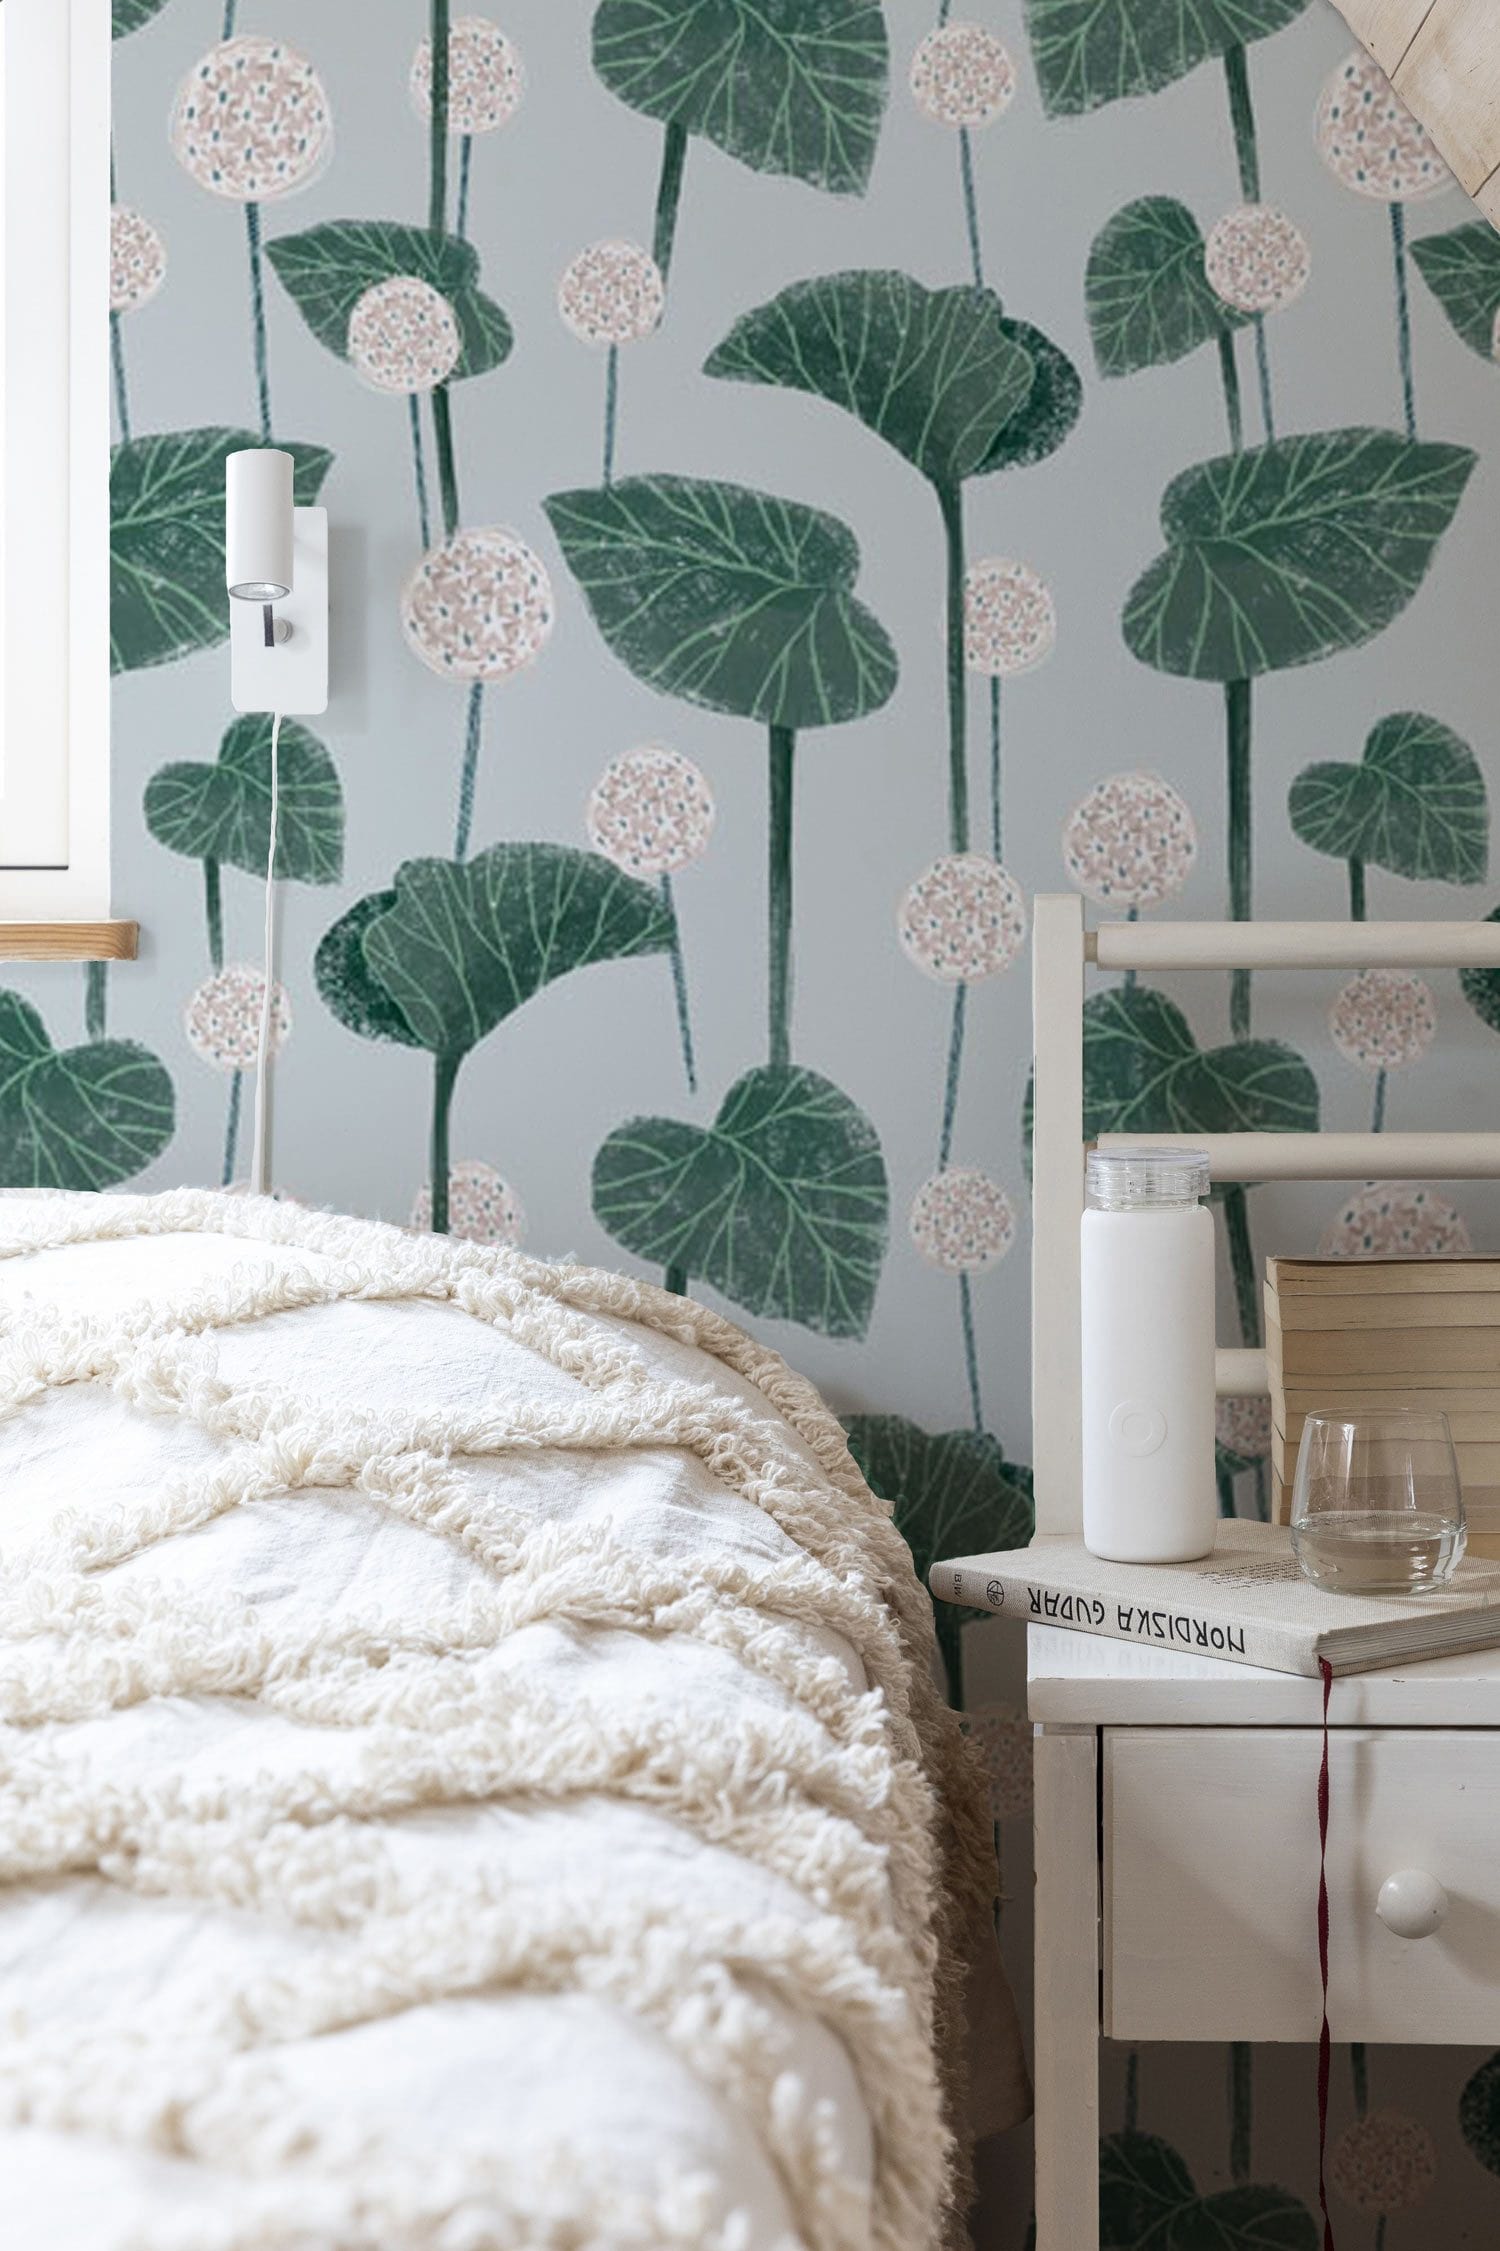 Wallpaper mural with lotus leaves for use in decorating bedrooms